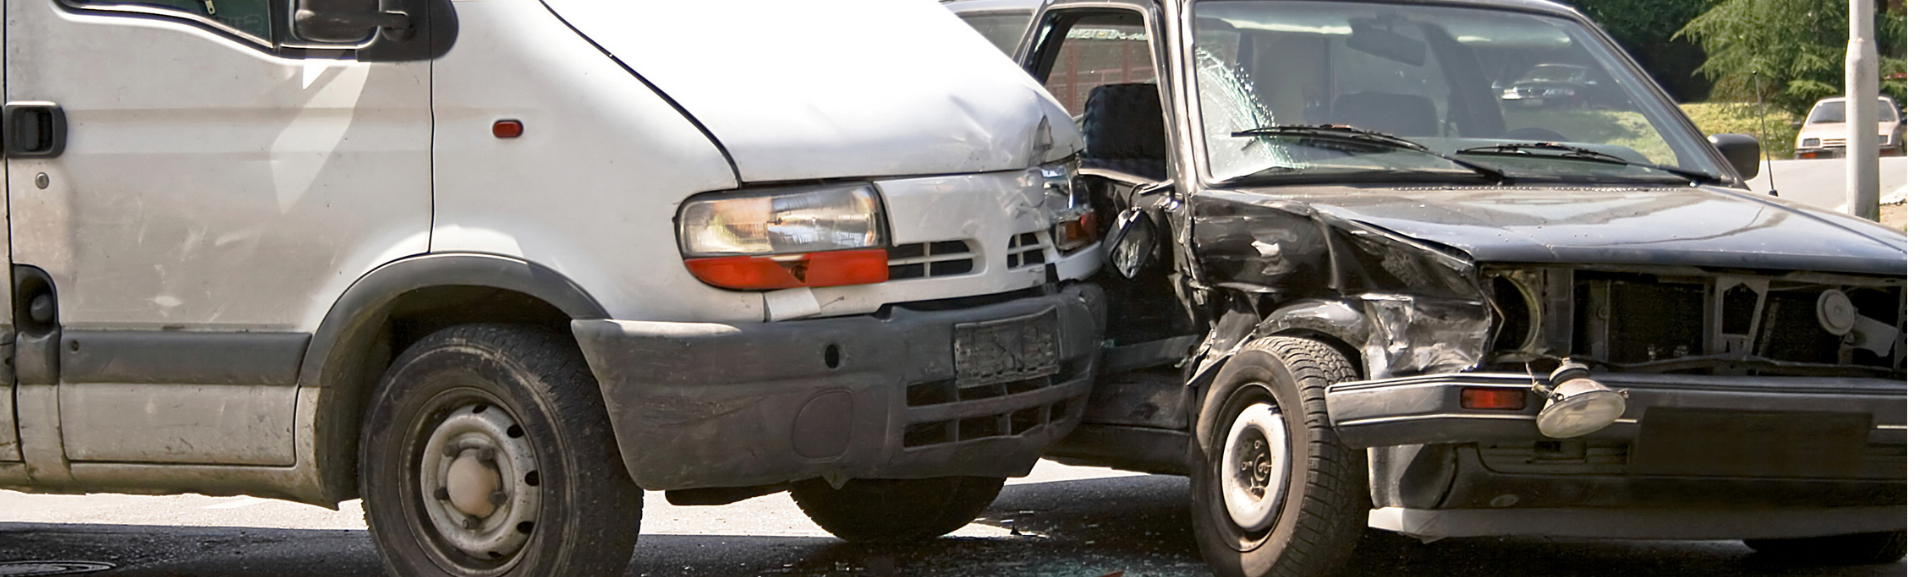 Anne Arundel County Car Accident Lawyers